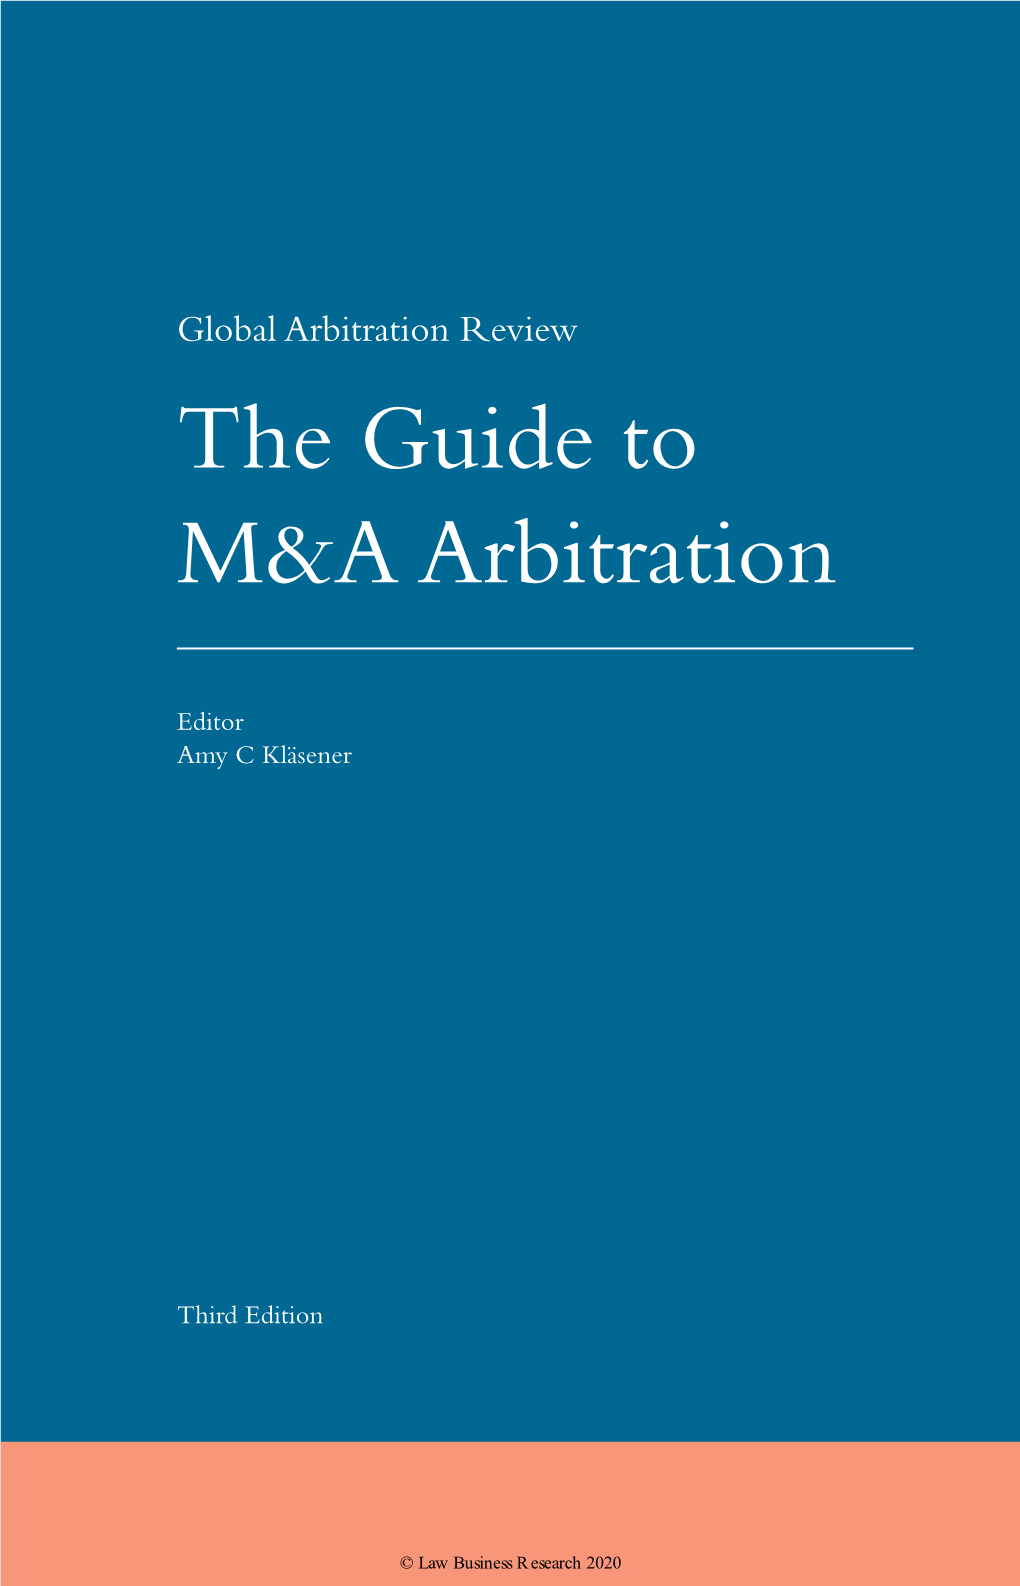 The Guide to M&A Arbitration